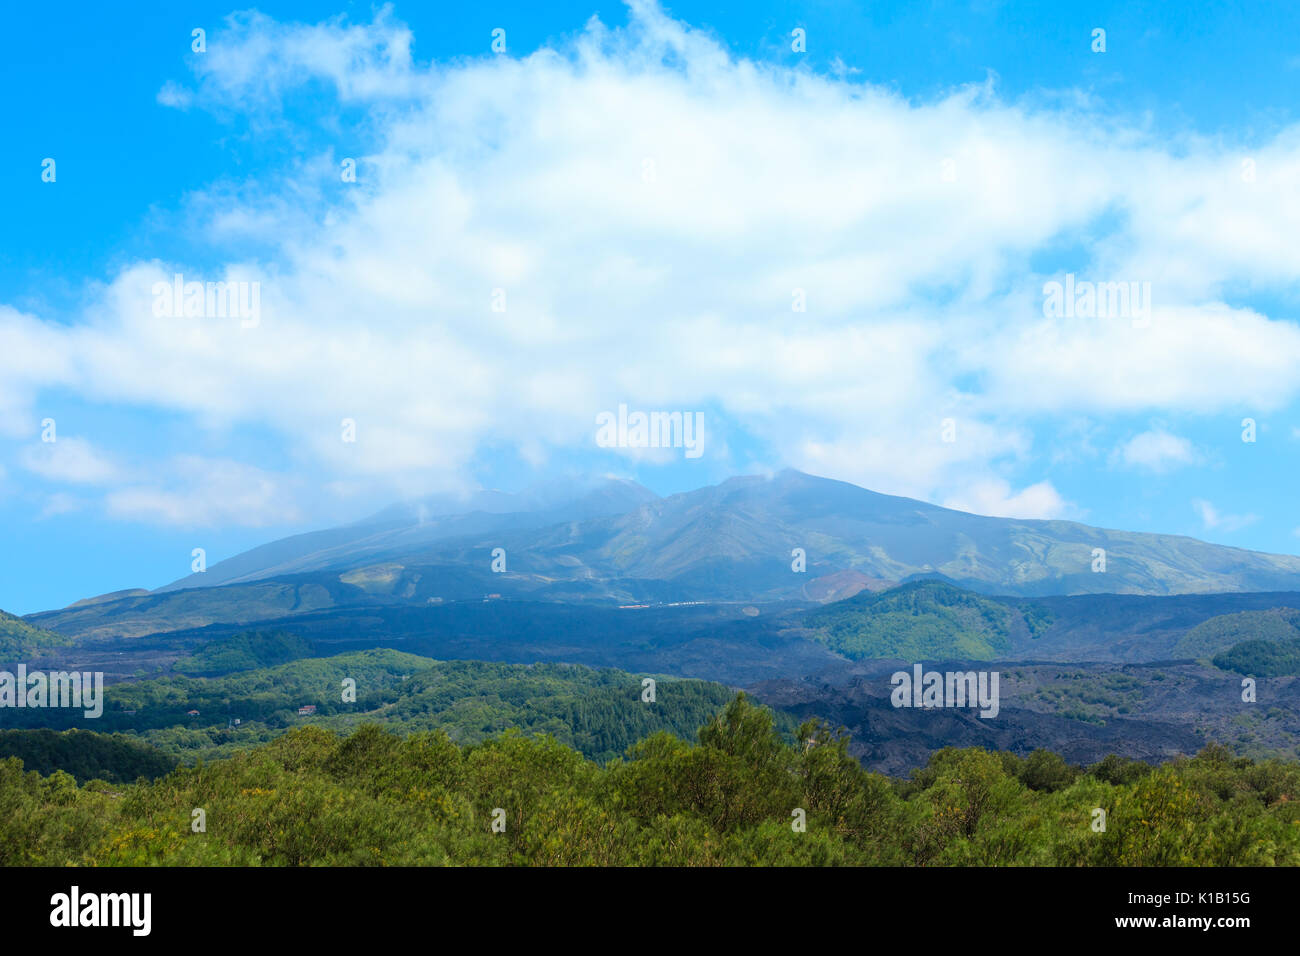 View from foot of summer Etna volcano mountain, Sicily, Italy Stock Photo